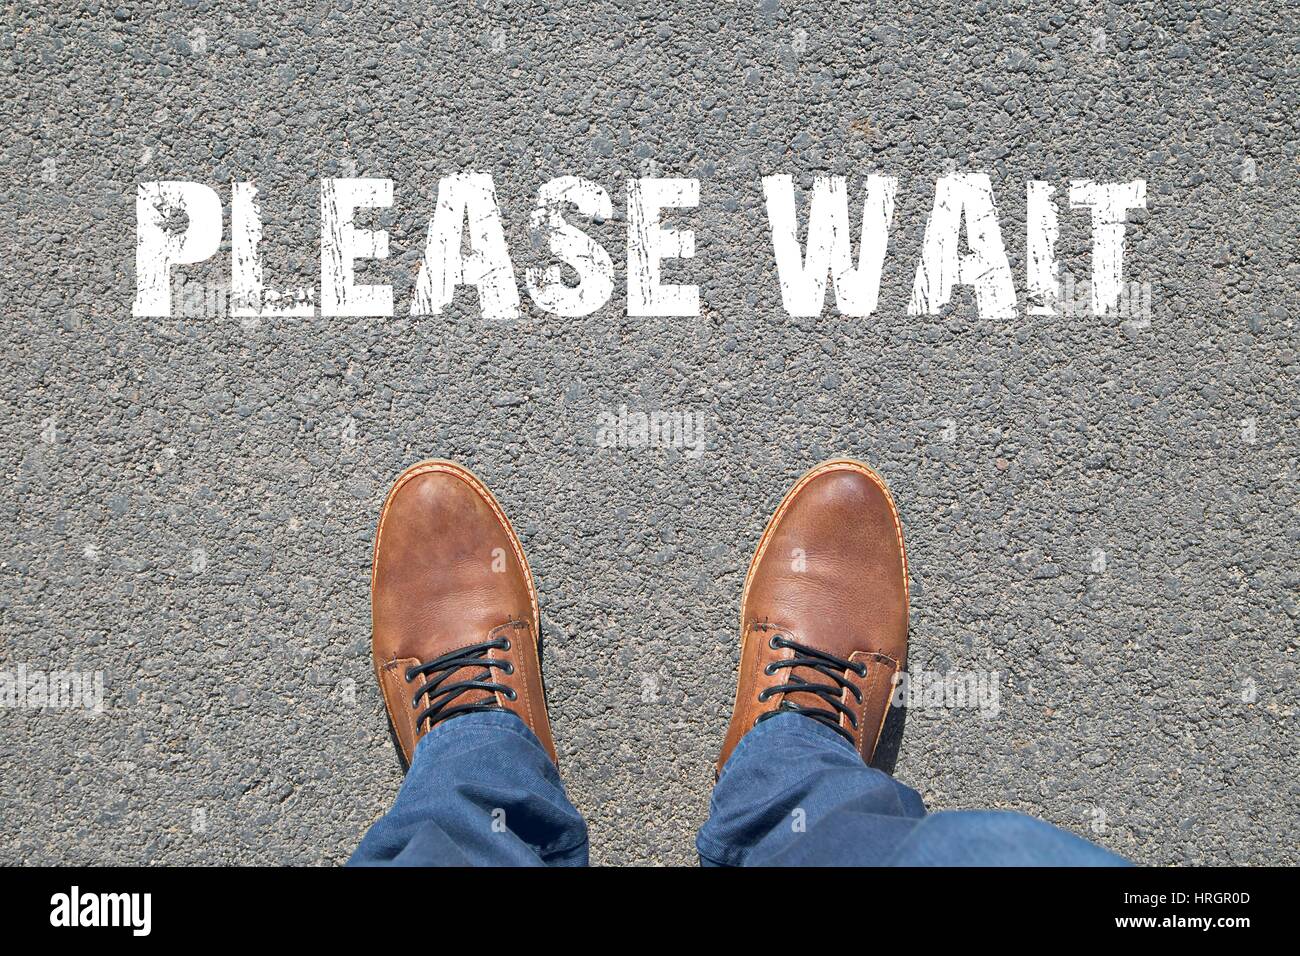 Feet on the street with text Stock Photo